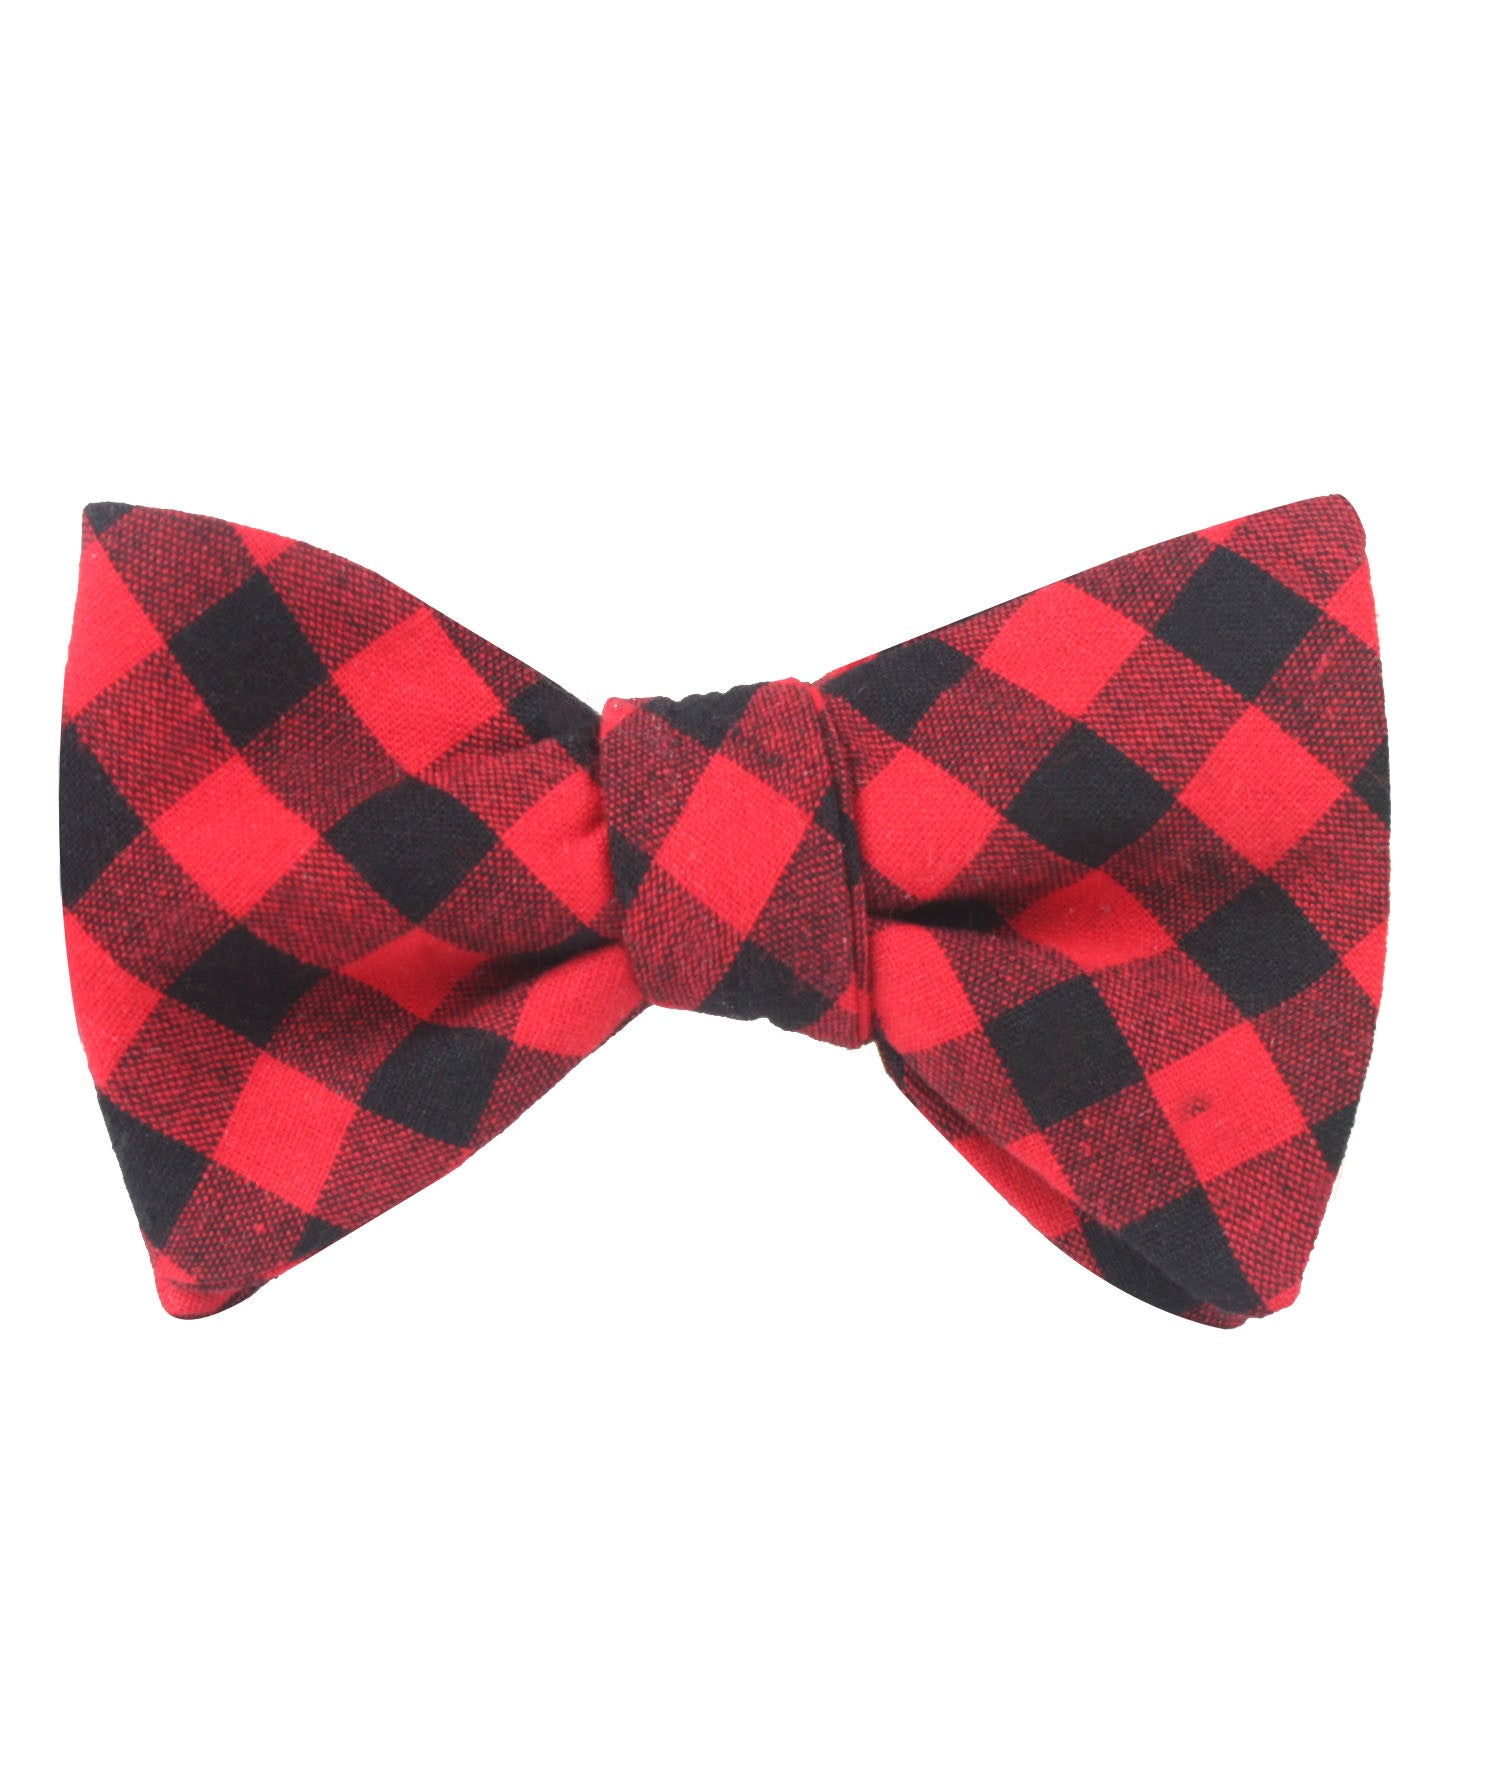 Red & Black Gingham Self Tied Bowtie